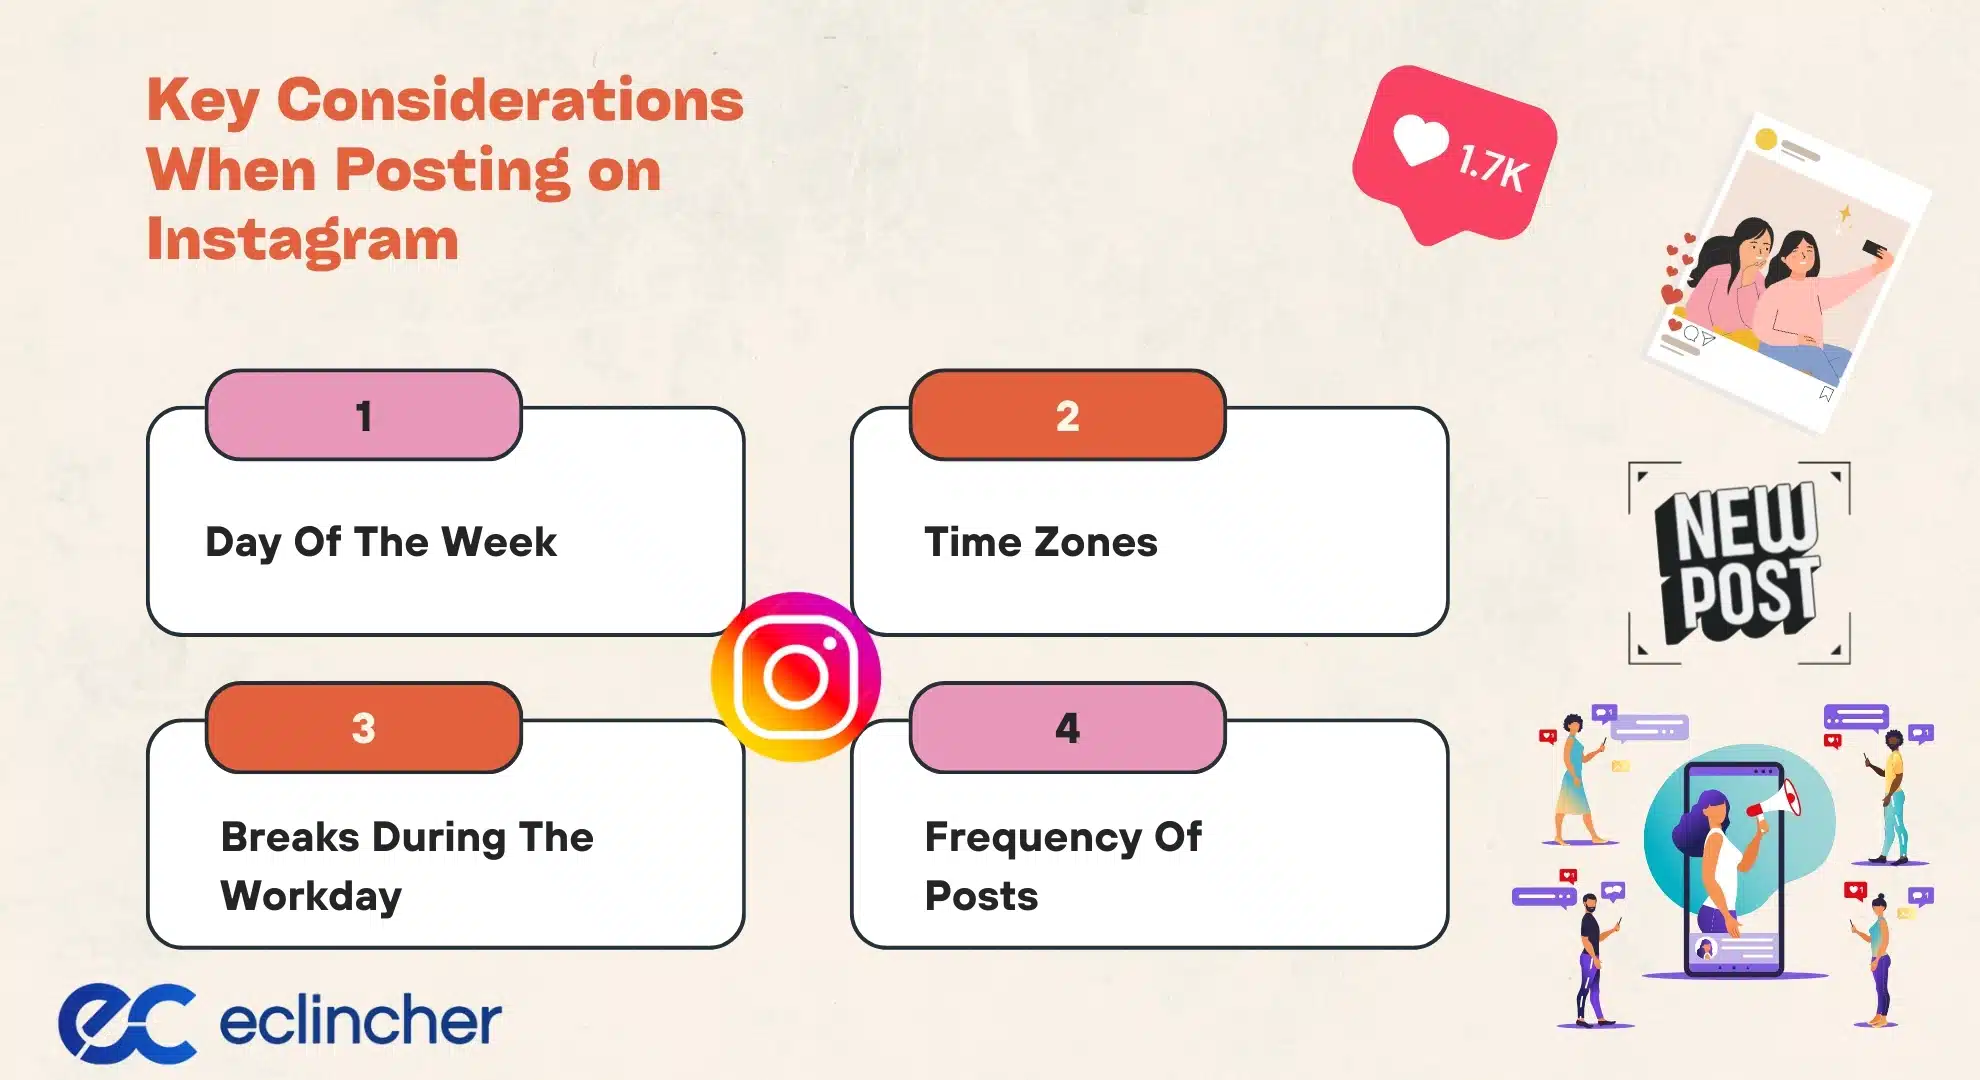 Key Considerations When Posting on Instagram